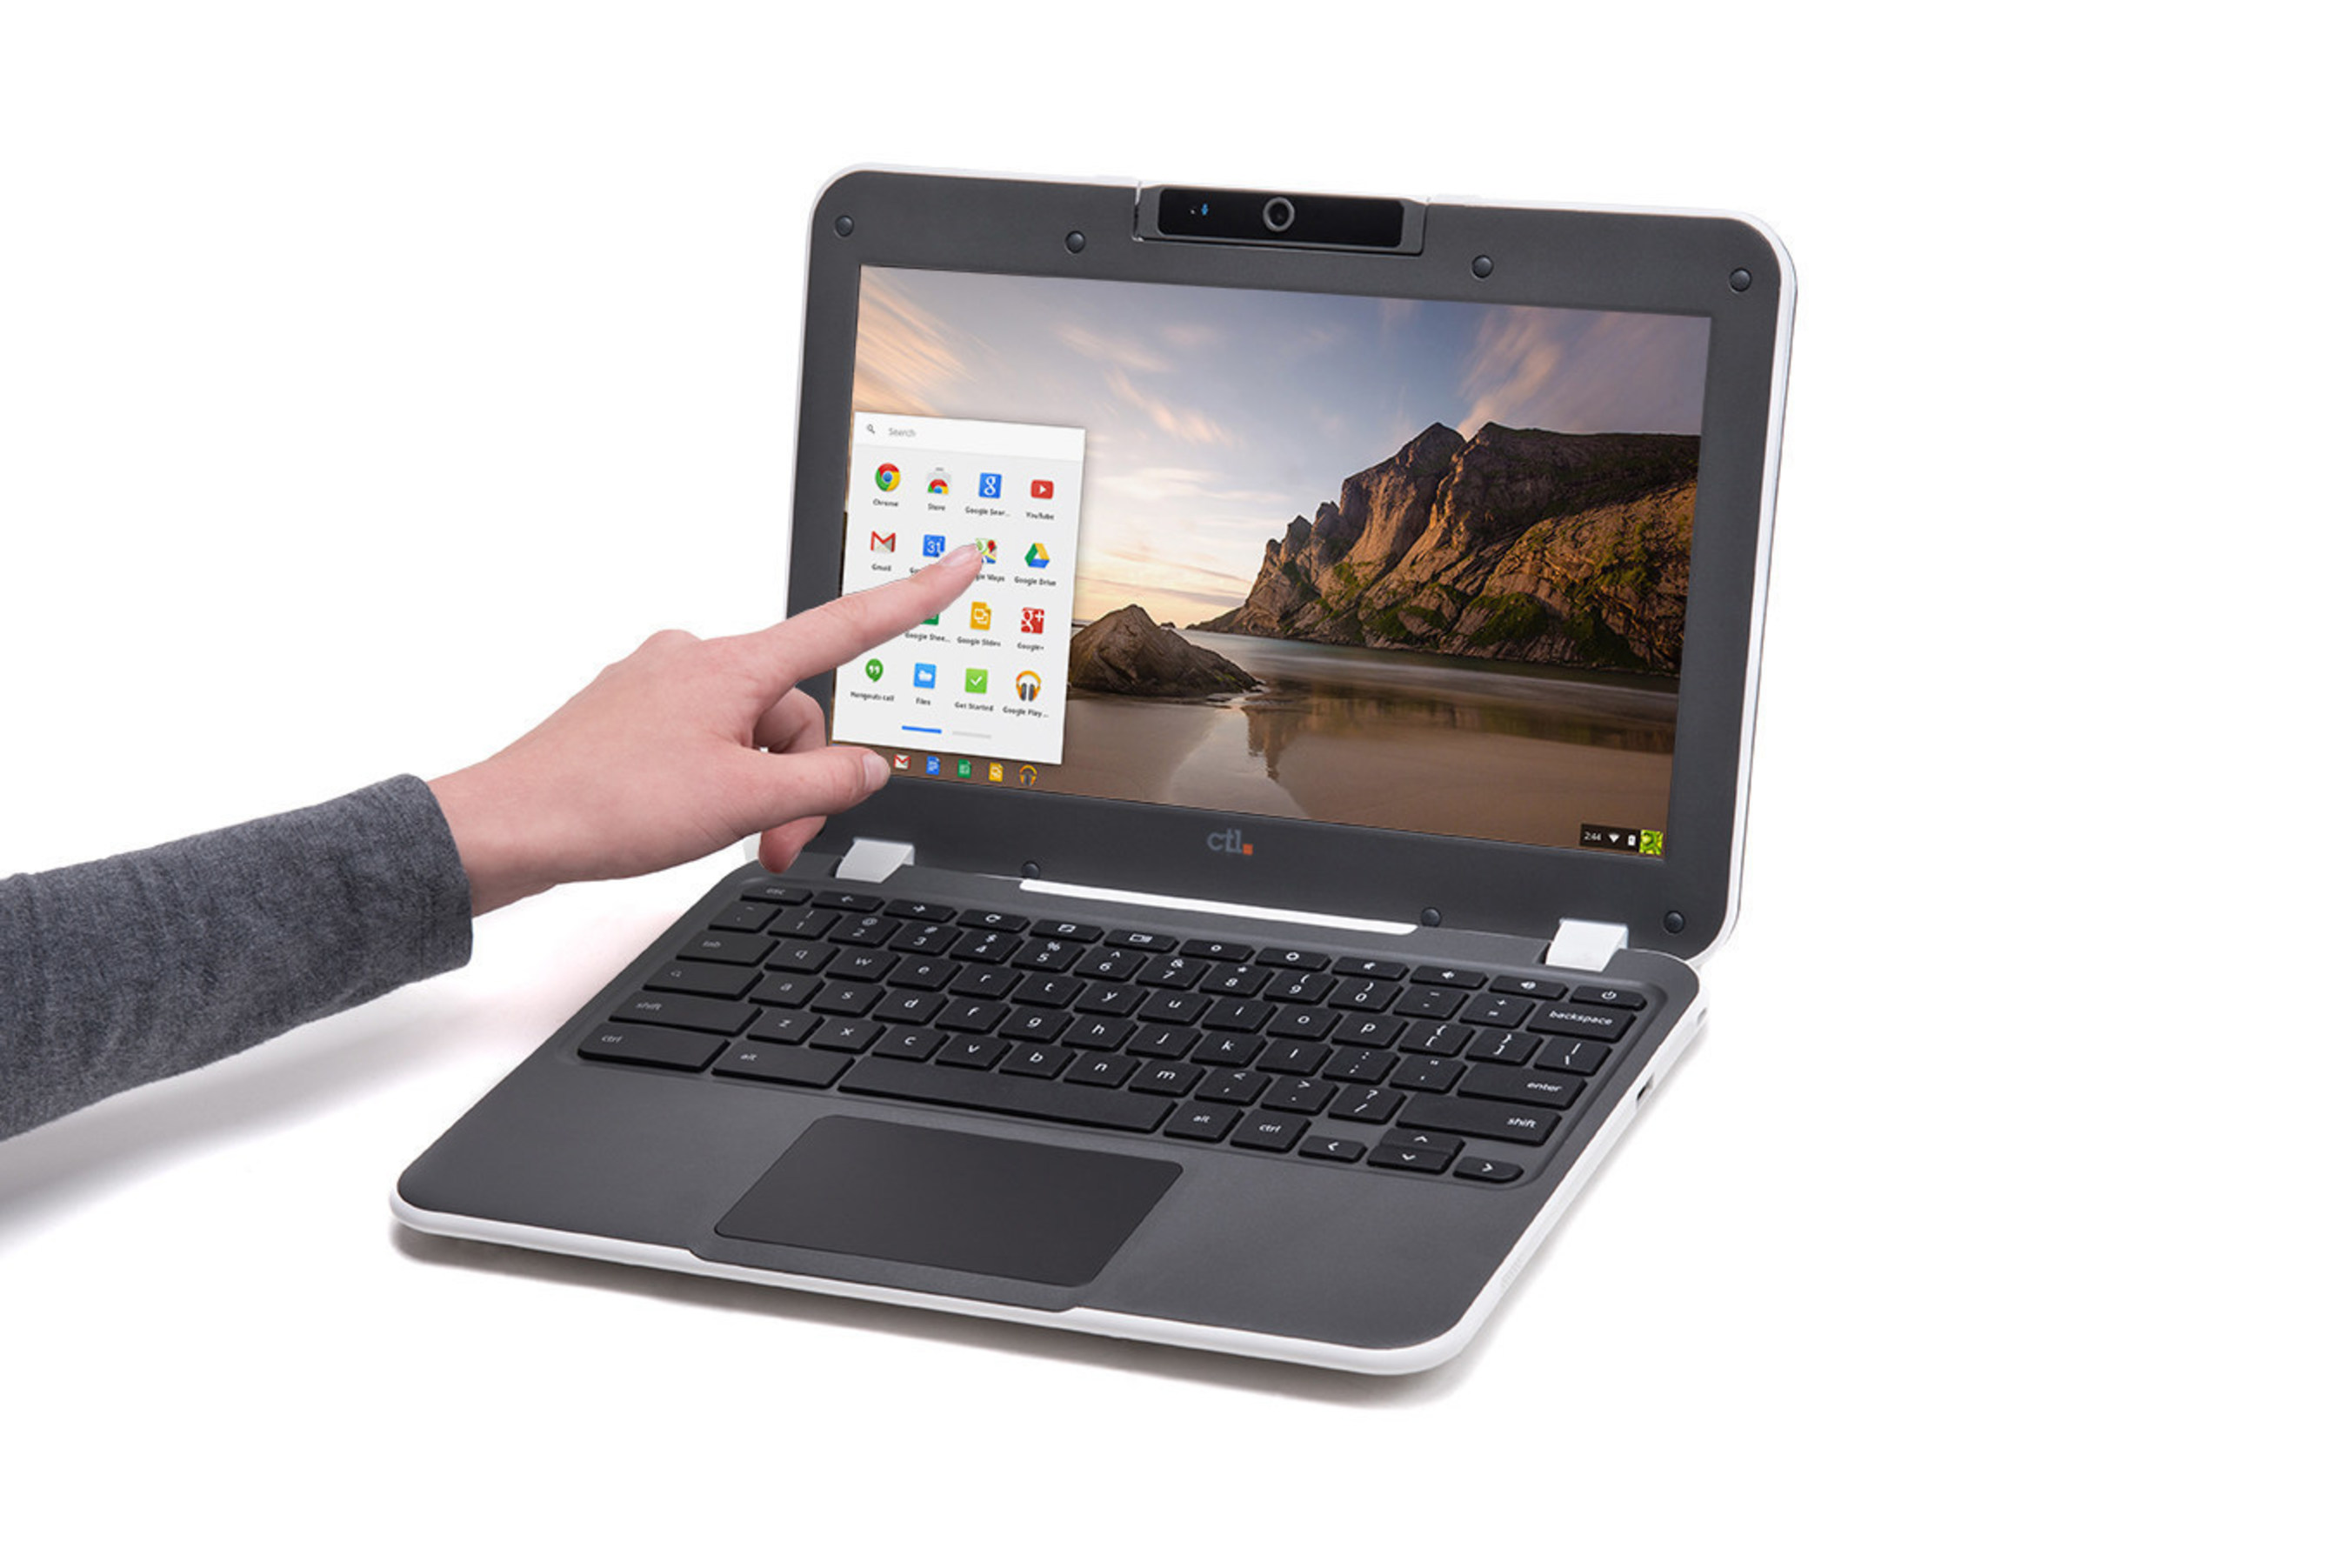 The CTL NL61TX Chromebook has a 10 point capacitive touchscreen and up-to 14 hour battery life.